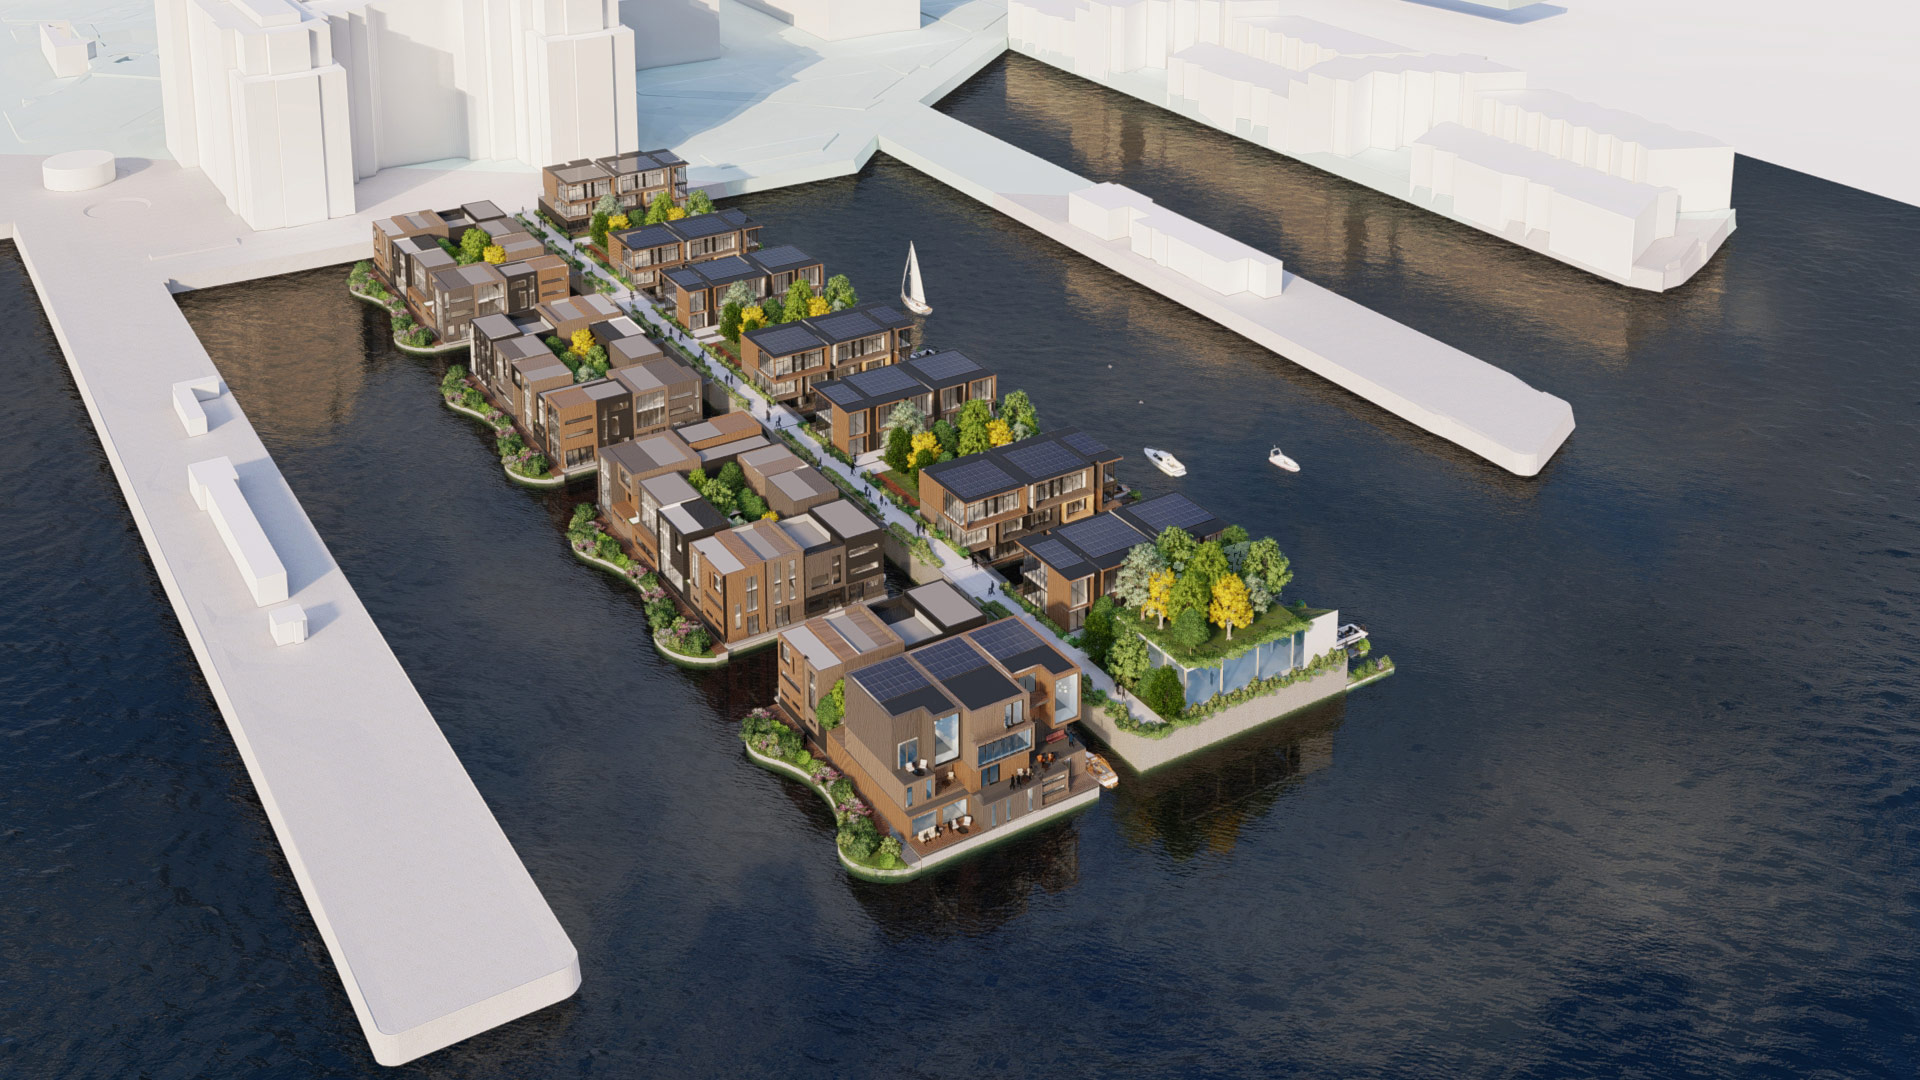 Aerial view of the Boston Pier 5 proposal in Hudson River context